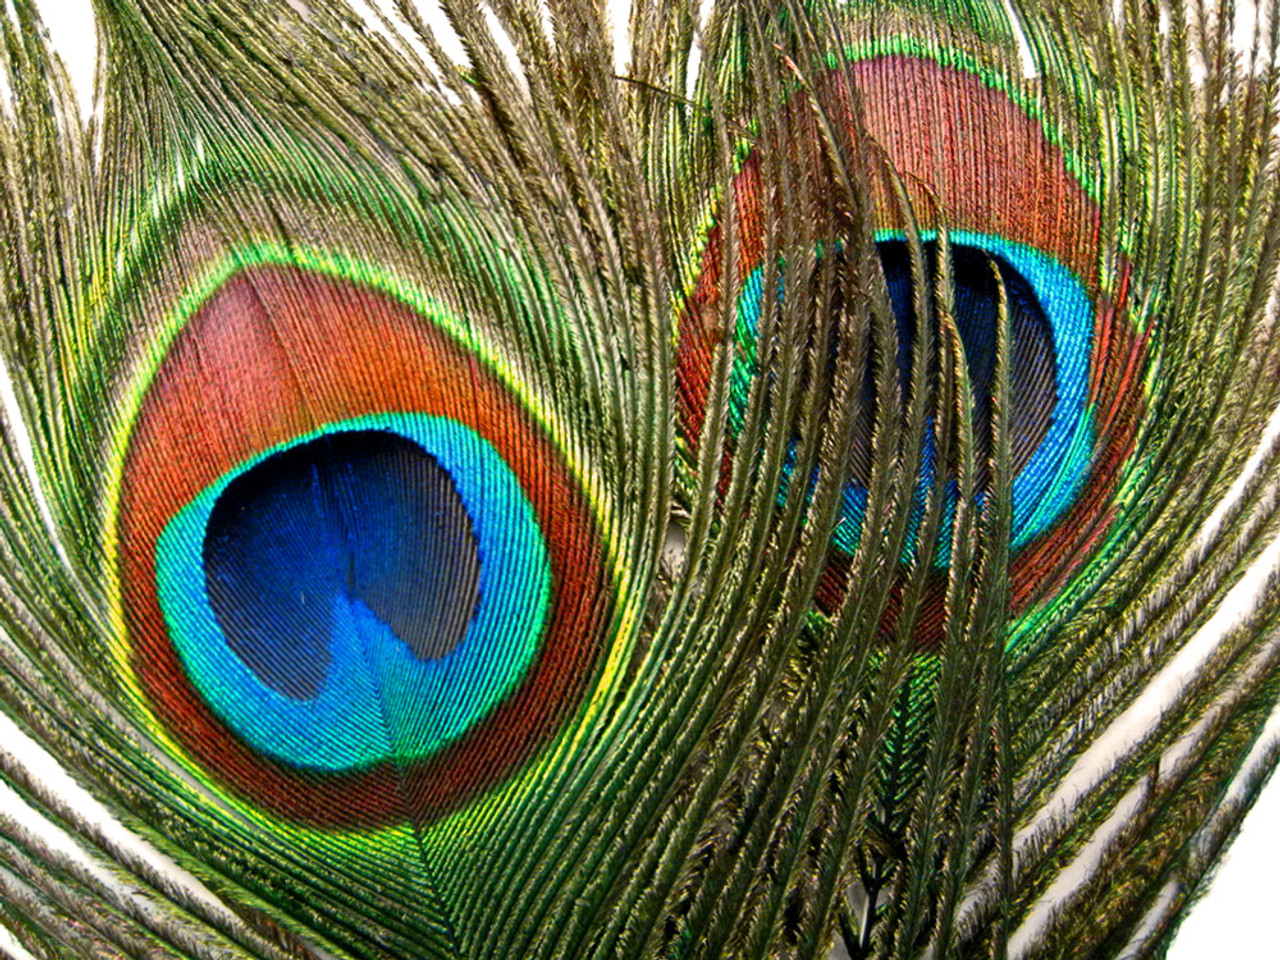  100PCS 10-12 Natural Peacock Eye Feathers Tail